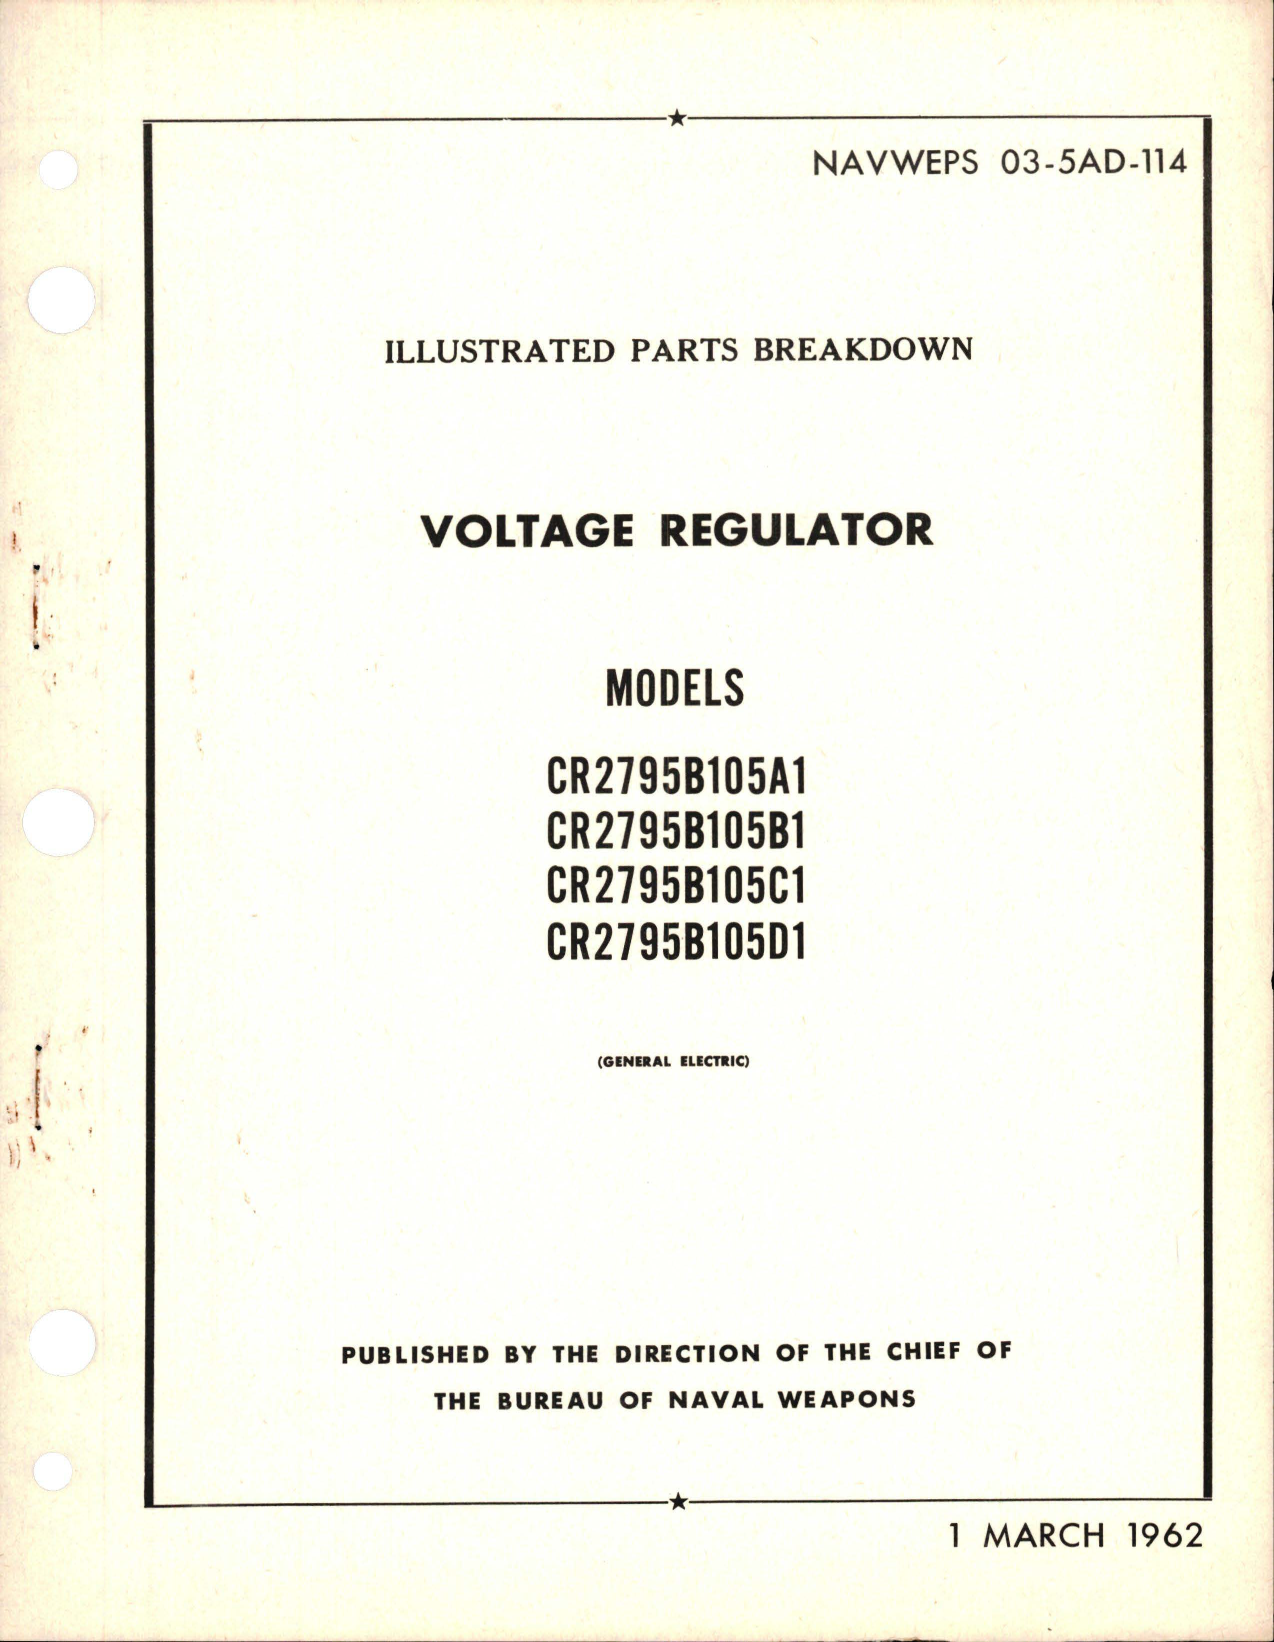 Sample page 1 from AirCorps Library document: Illustrated Parts Breakdown for Voltage Regulator - Models CR2795B105A1, CR2795B105B1, CR2795B105C1, and CR2795B105D1